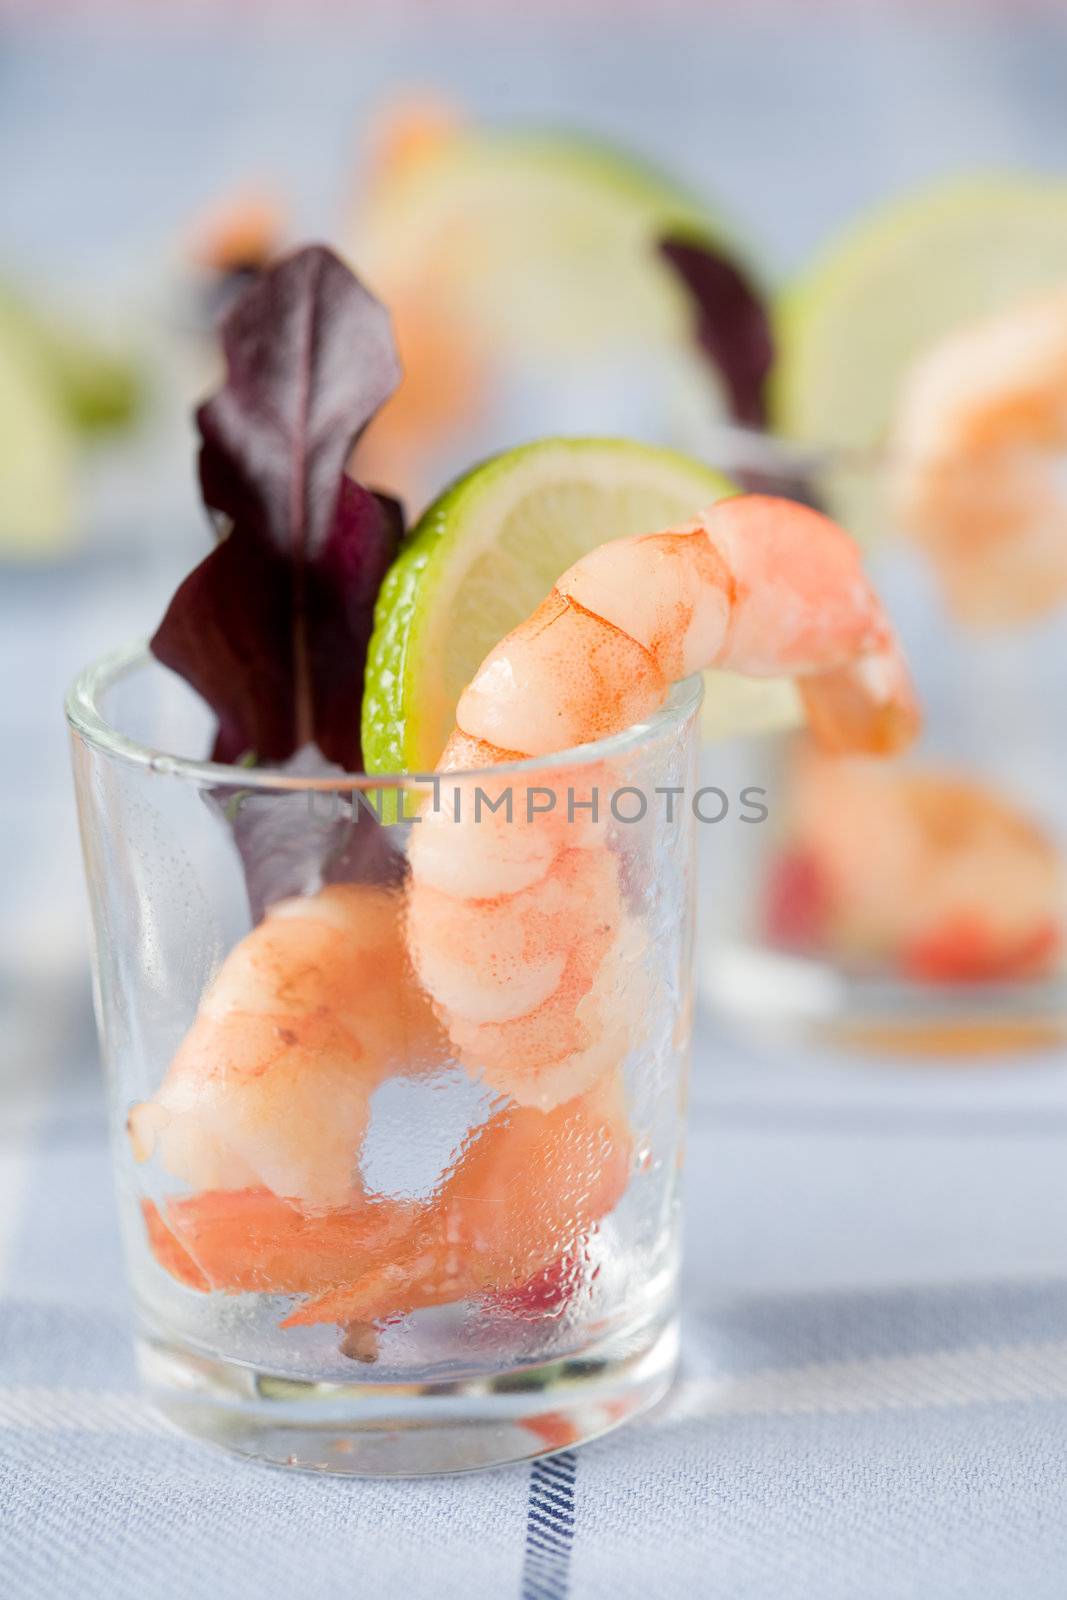 Small appetizer served in a glass with shrimps and lemon